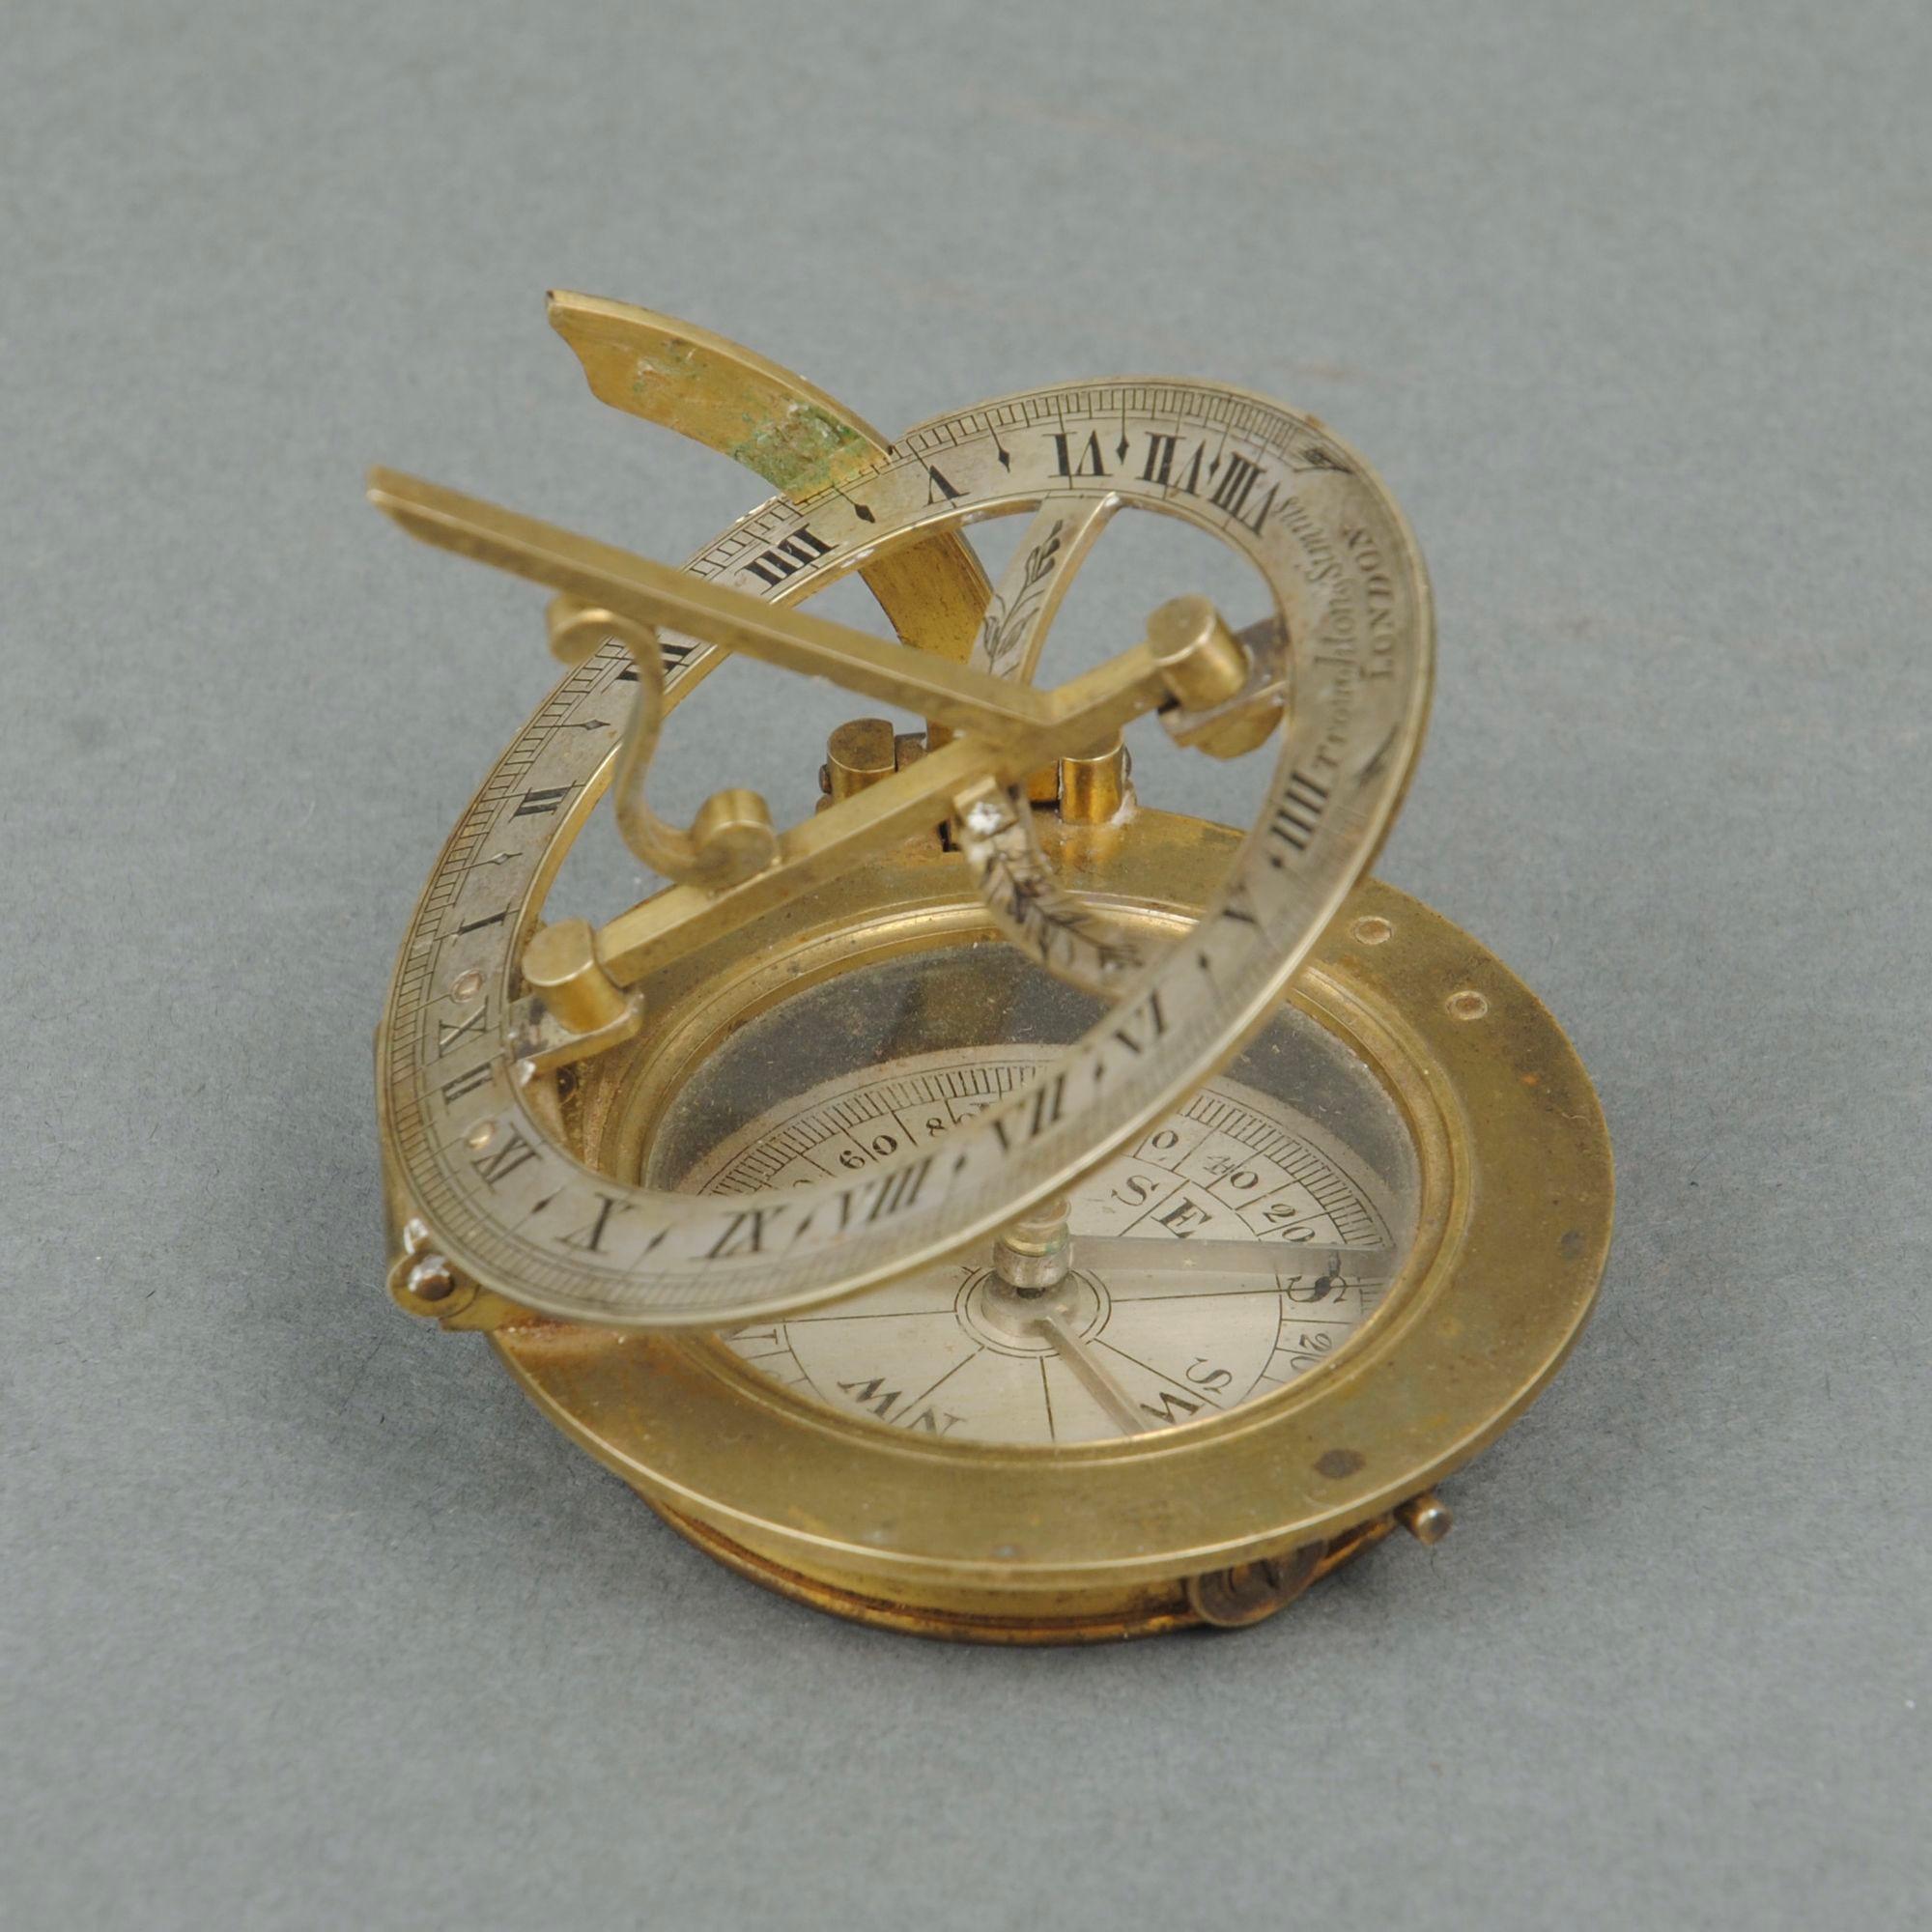 A good example of a pocket equinoctial sundial by Troughton and Simms, London. In the original red leather case.
The adjustable silvered chapter ring allows the traveler to set the latitude of the city they are in to get the correct time.
6.5 cm